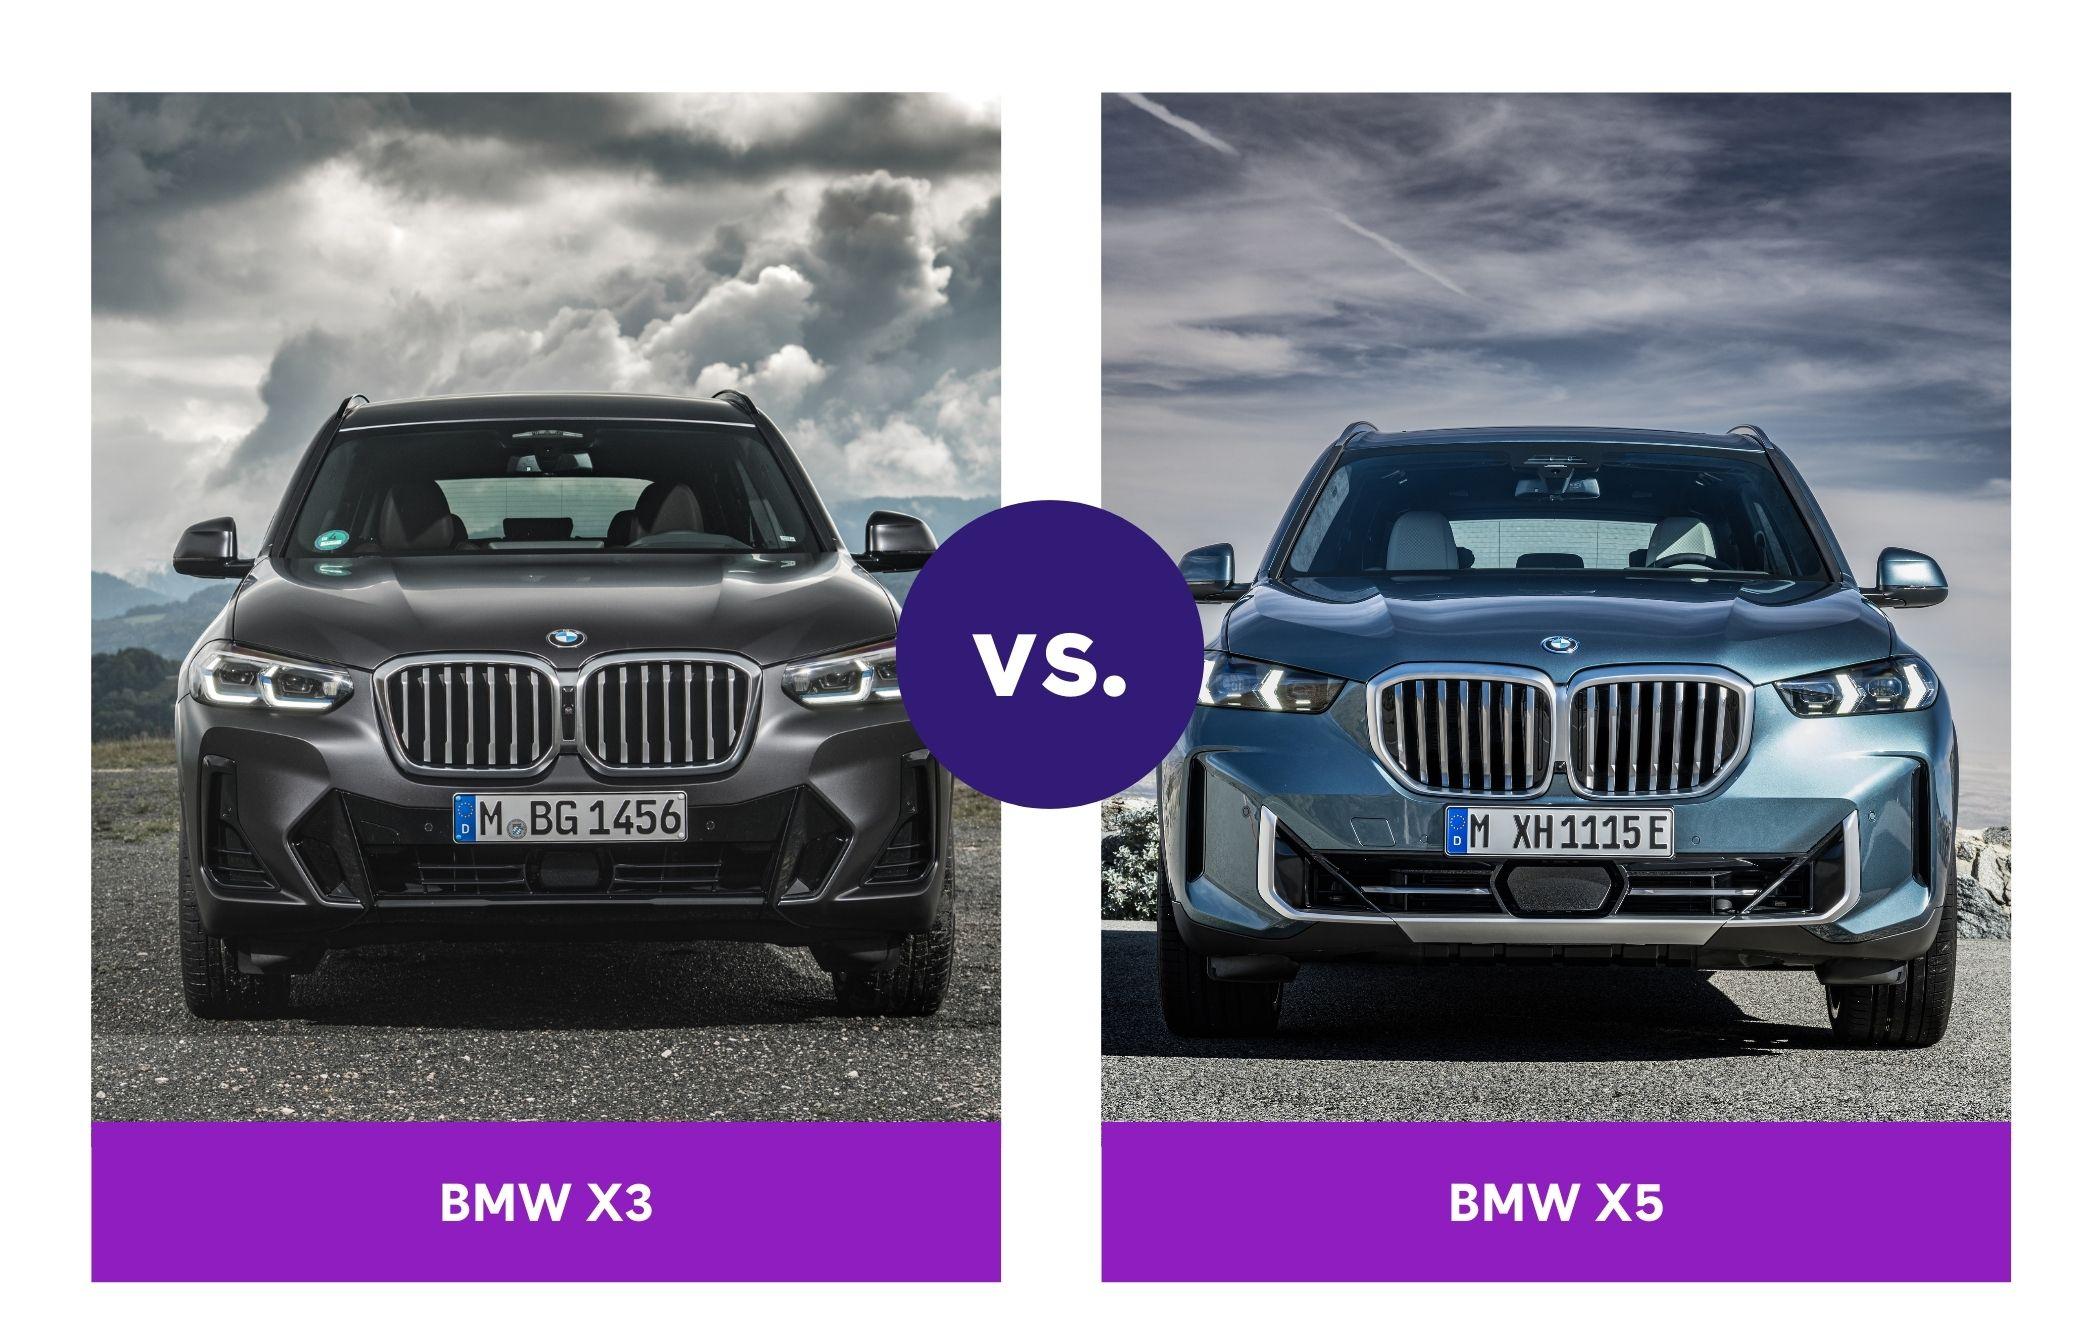 A comparison of the BMW X3 and BMW X5 models